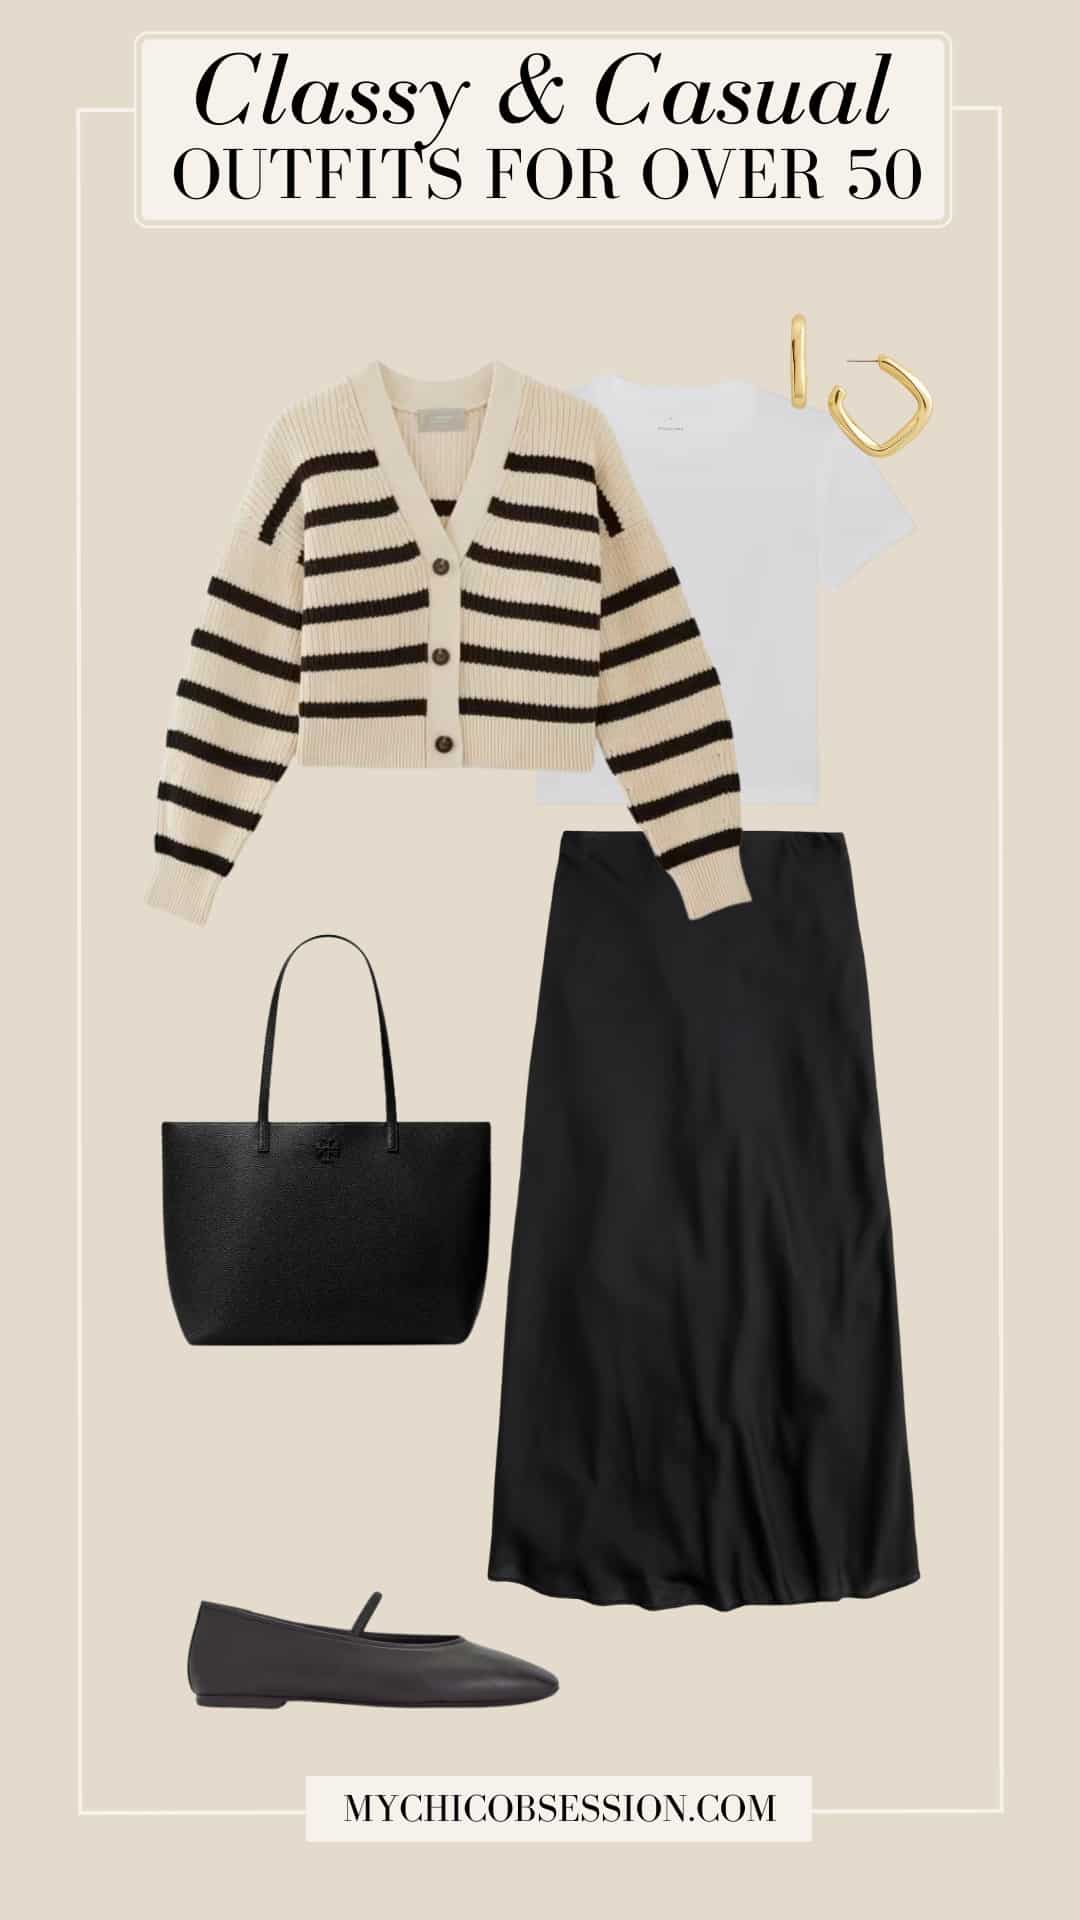 classy casual outfit for ladies over 50 - midi skirt white tee striped cardigan tote bag